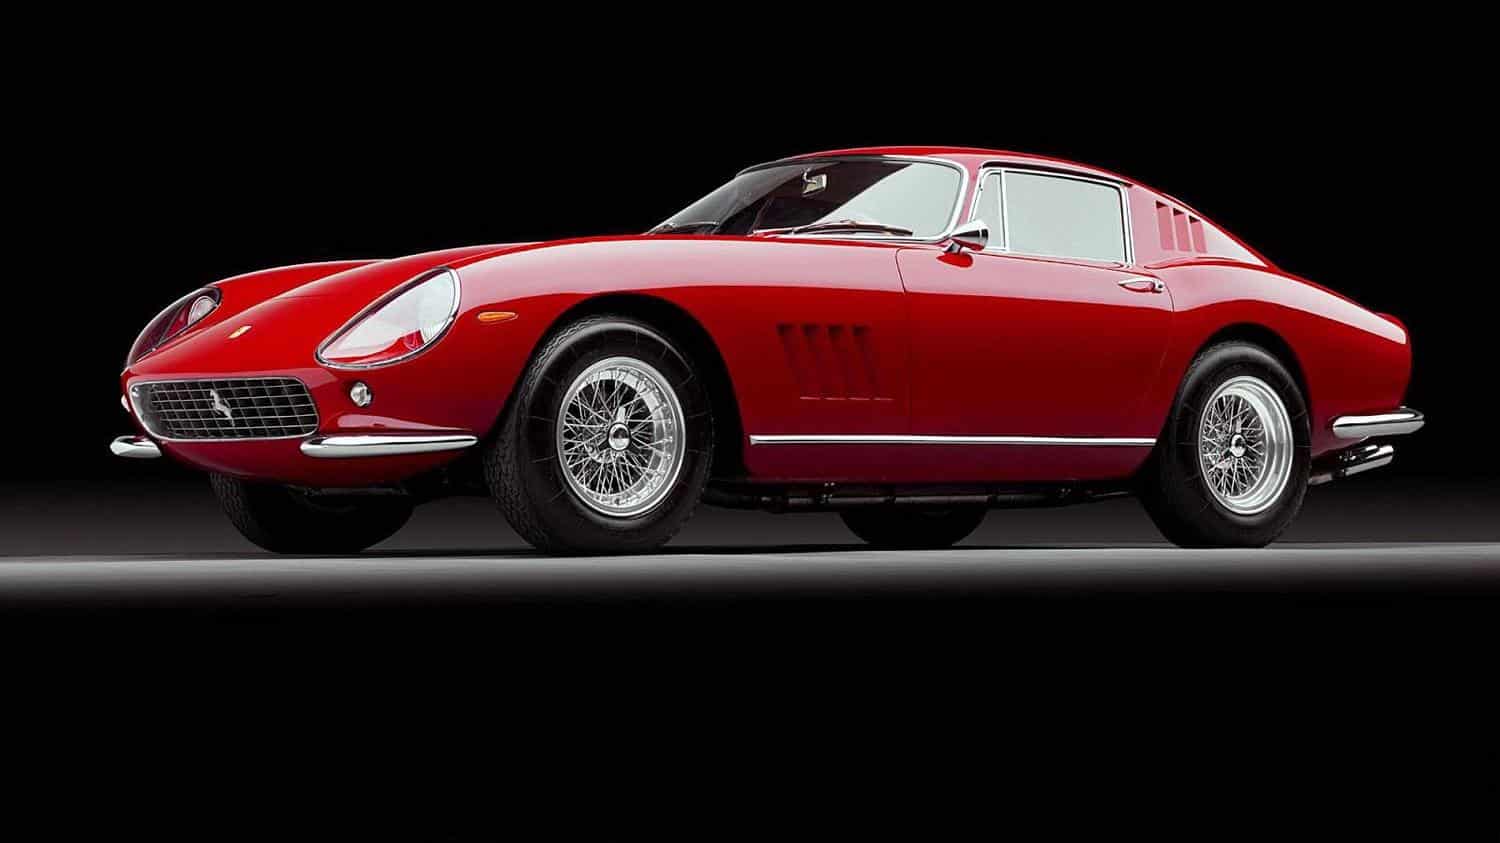 Ferrari 275 GTB/4 - one of the sexiest cars of the 1960s